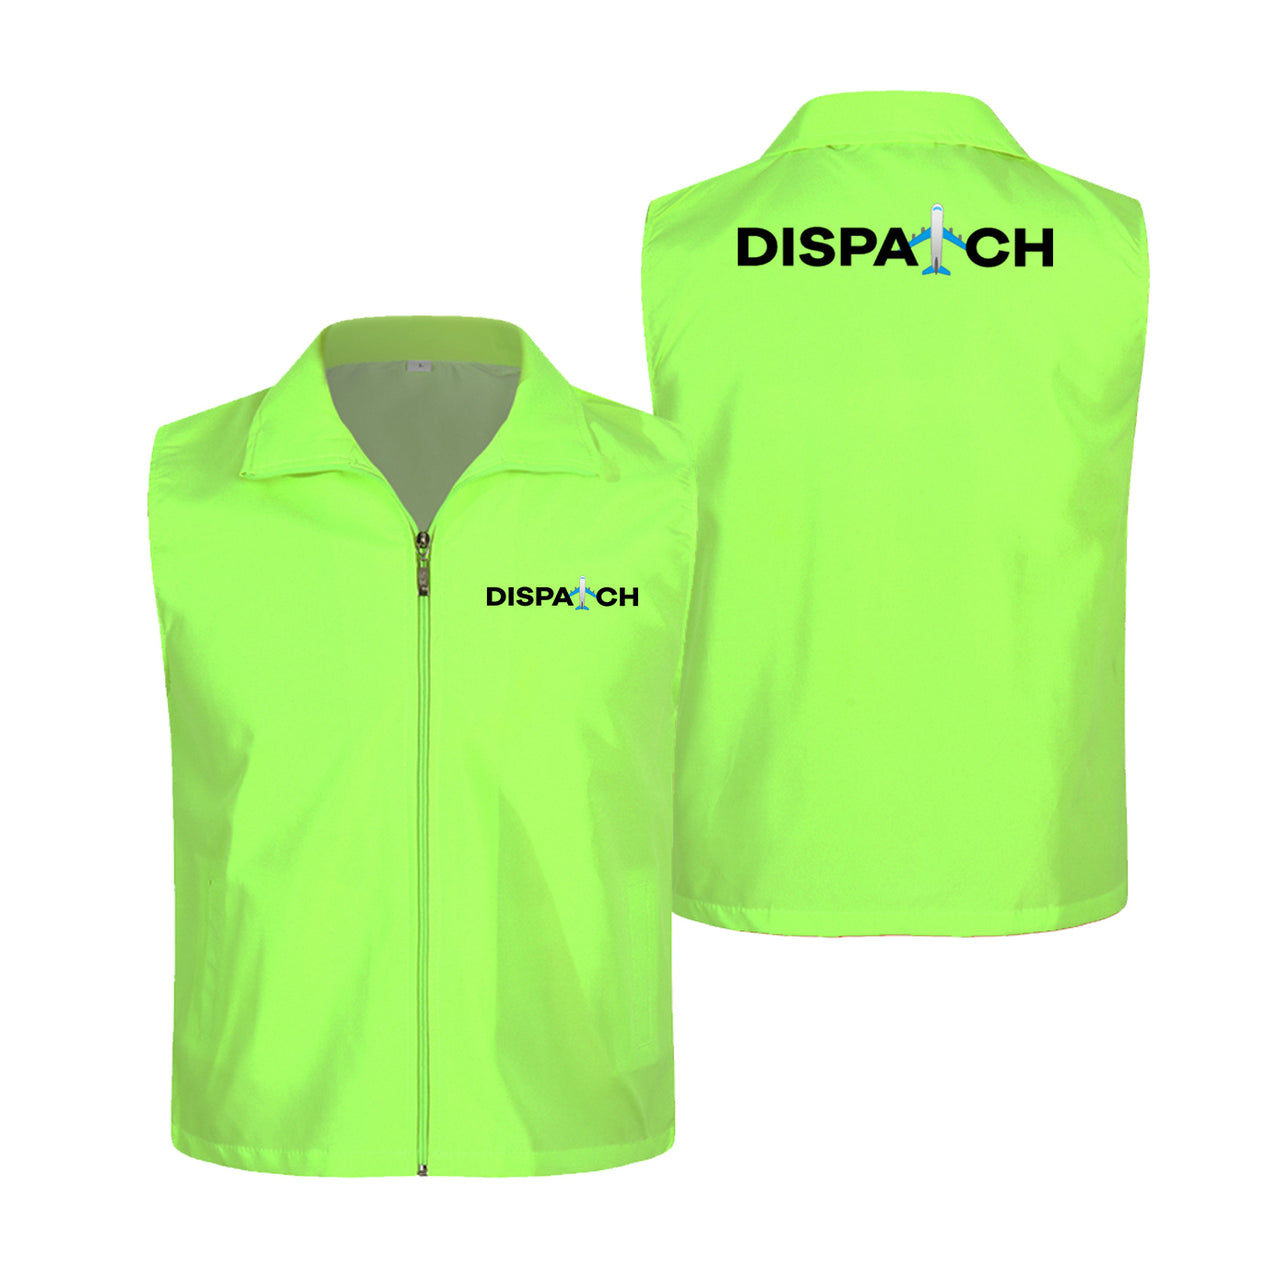 Dispatch Designed Thin Style Vests